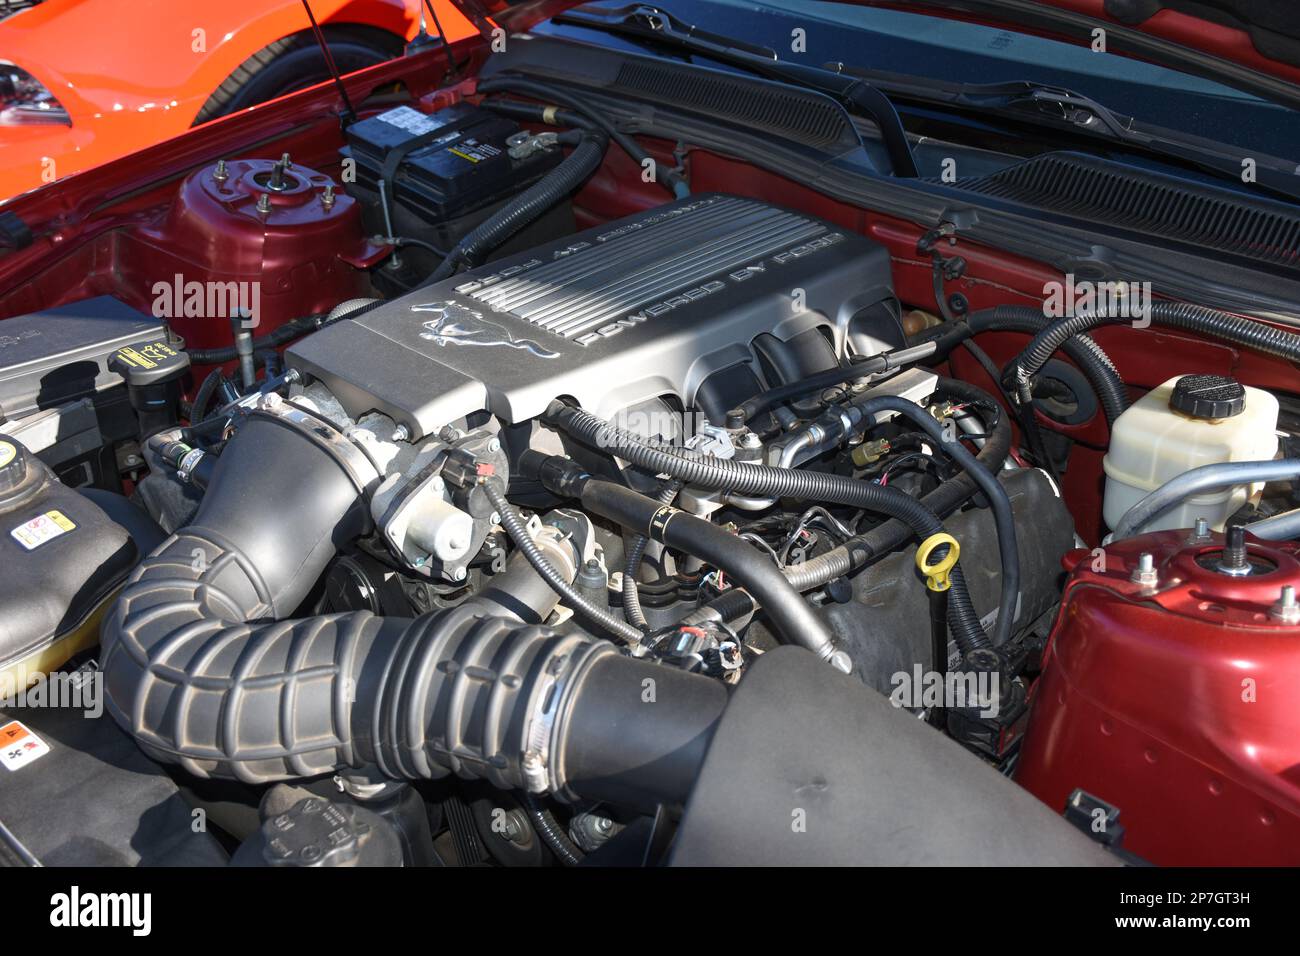 The Engine Bay of a Ford Mustang. Stock Photo